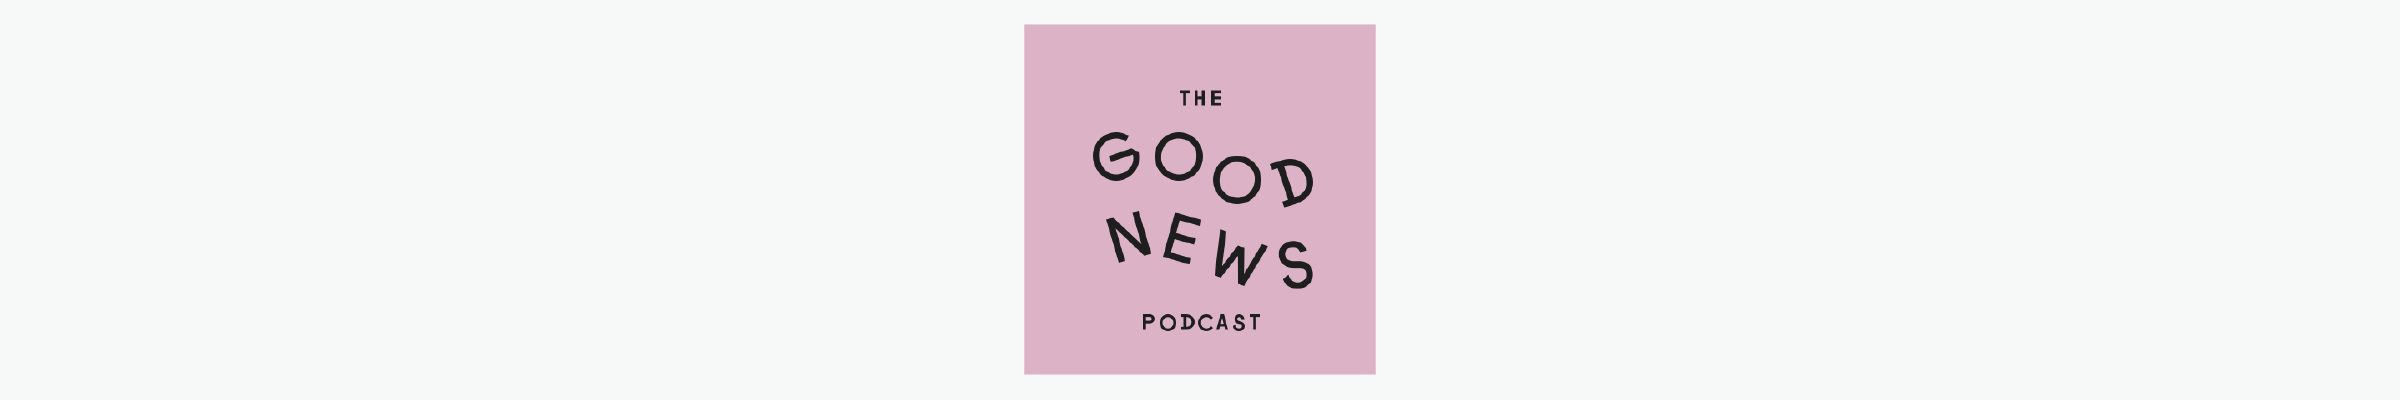 Banner of The Good News podcast